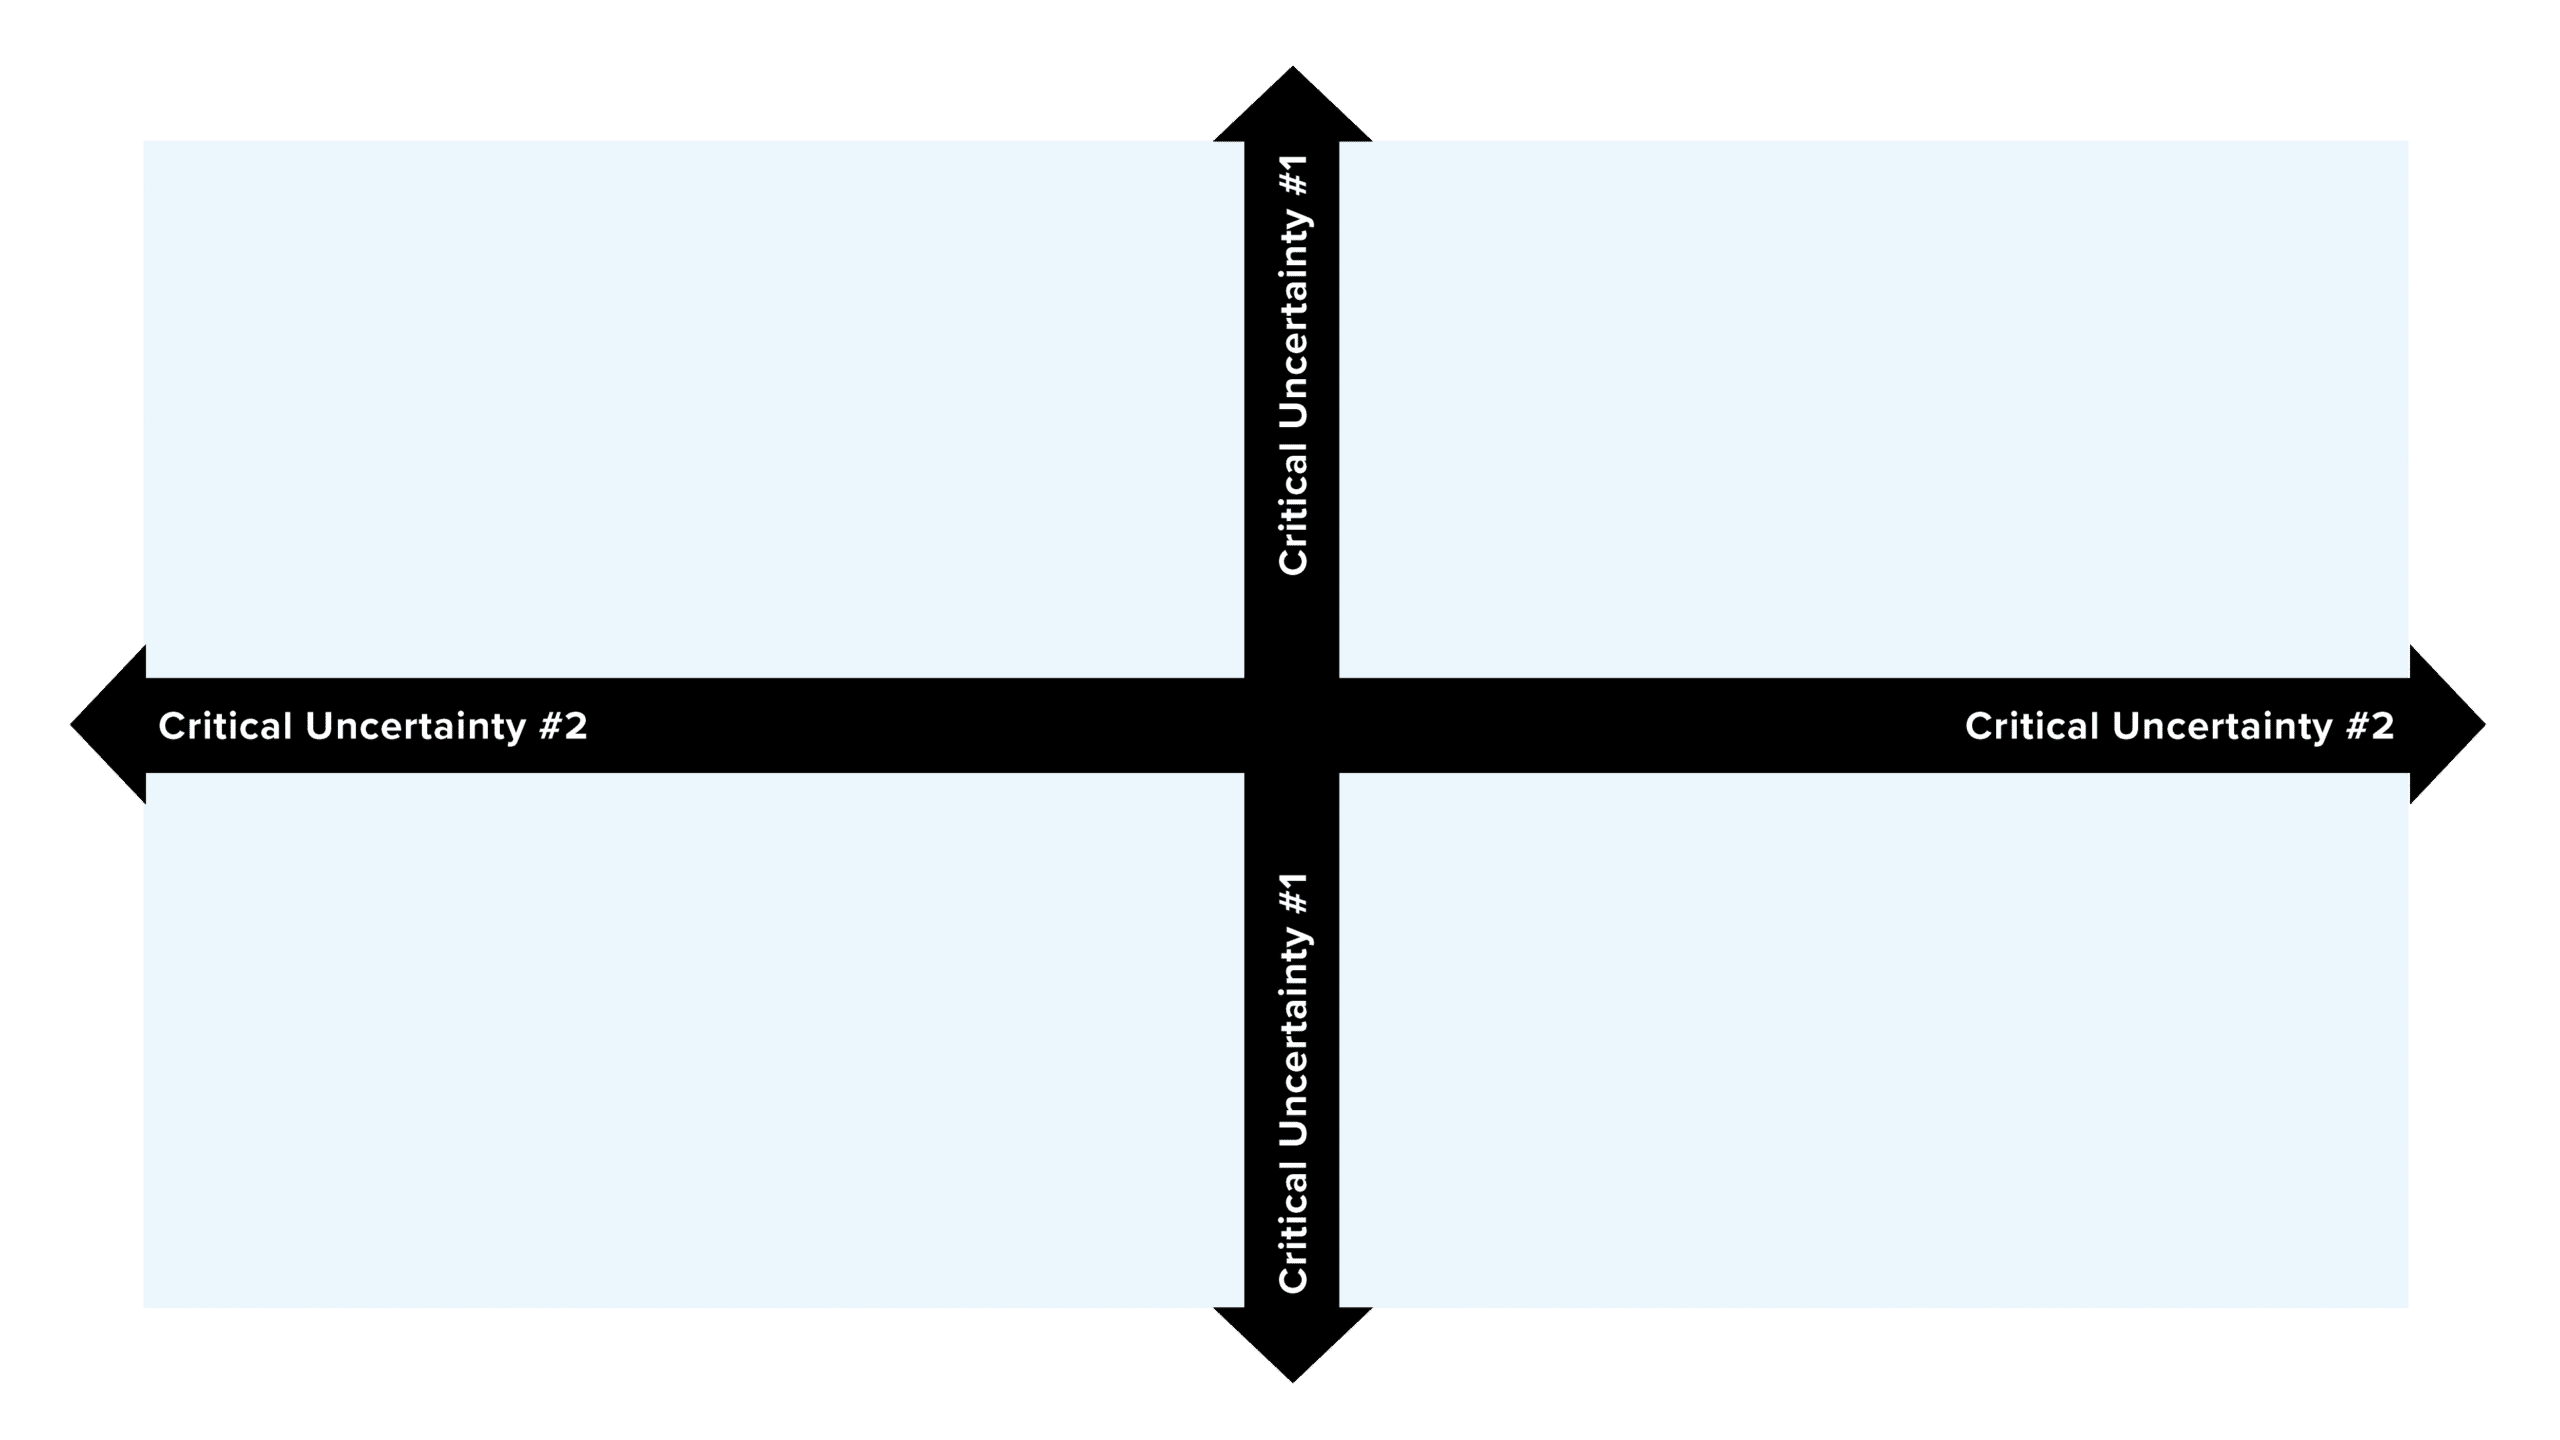 2x2 matrix showing horizontal and vertical axes, each axis label as "Critical Uncertainty" #1 and #2